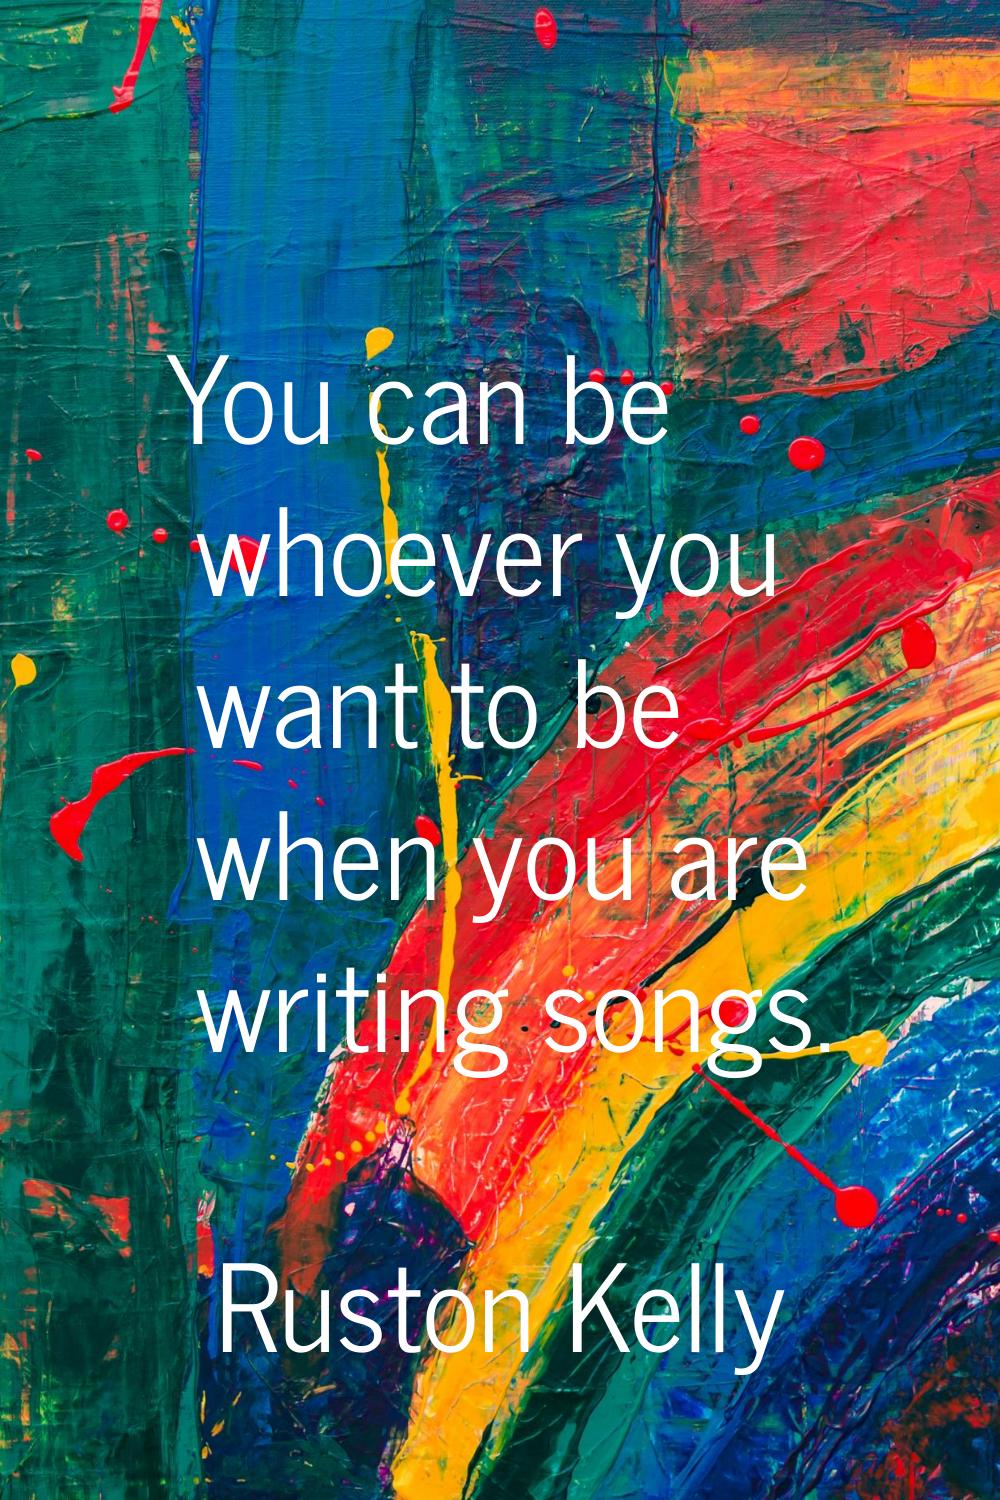 You can be whoever you want to be when you are writing songs.